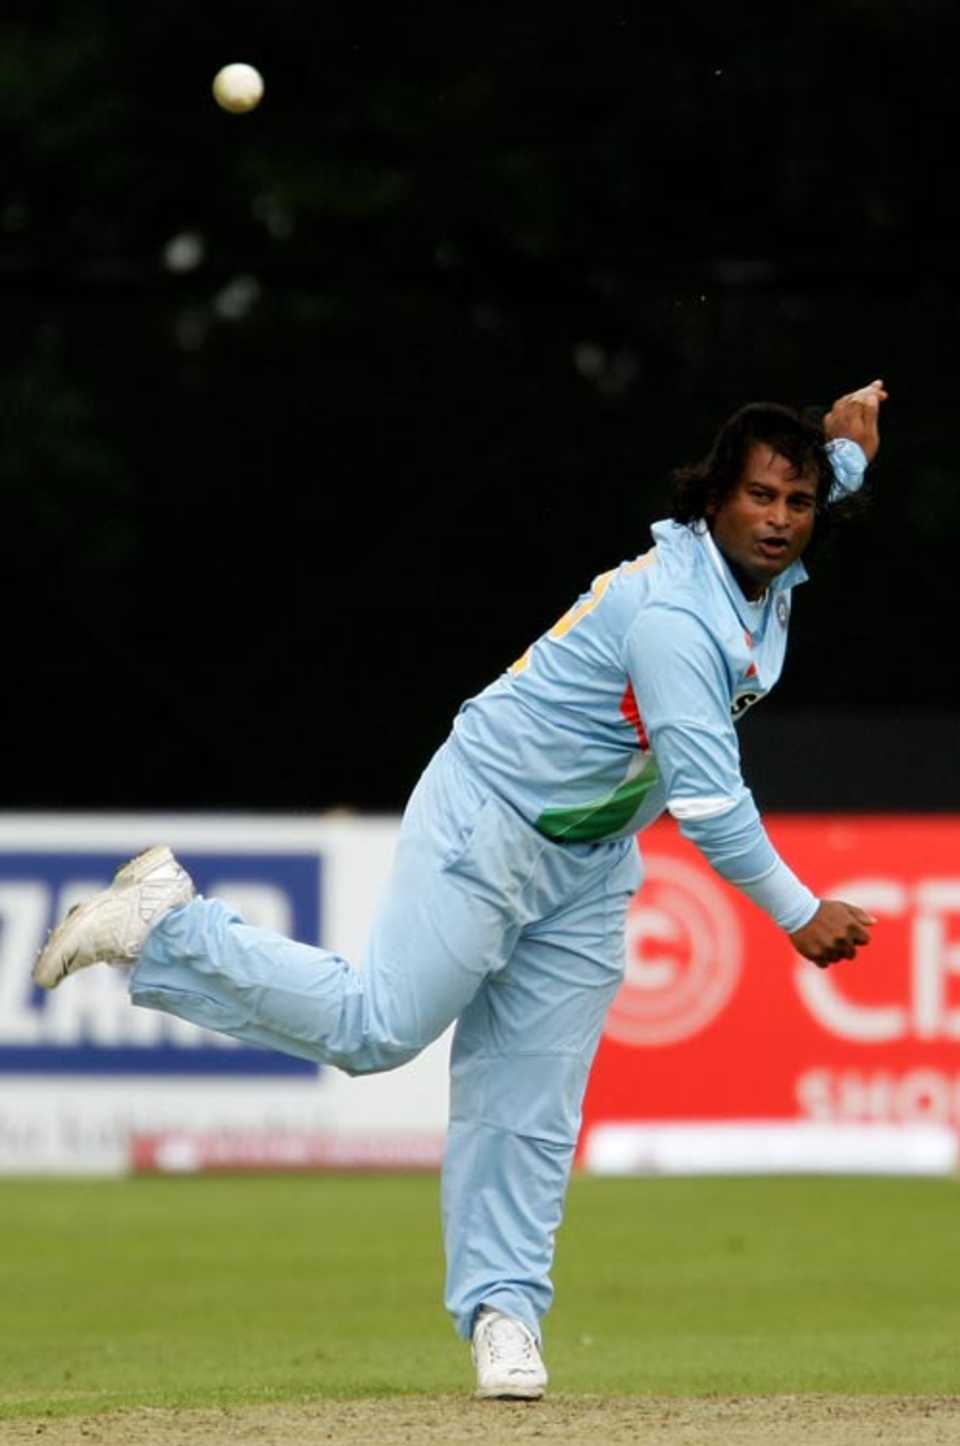 Ramesh Powar bowled accurately and finished with figures of 1 for 39, India v South Africa, Civil Service Cricket Ground, Stormont, Belfast, Ireland, June 26, 2007